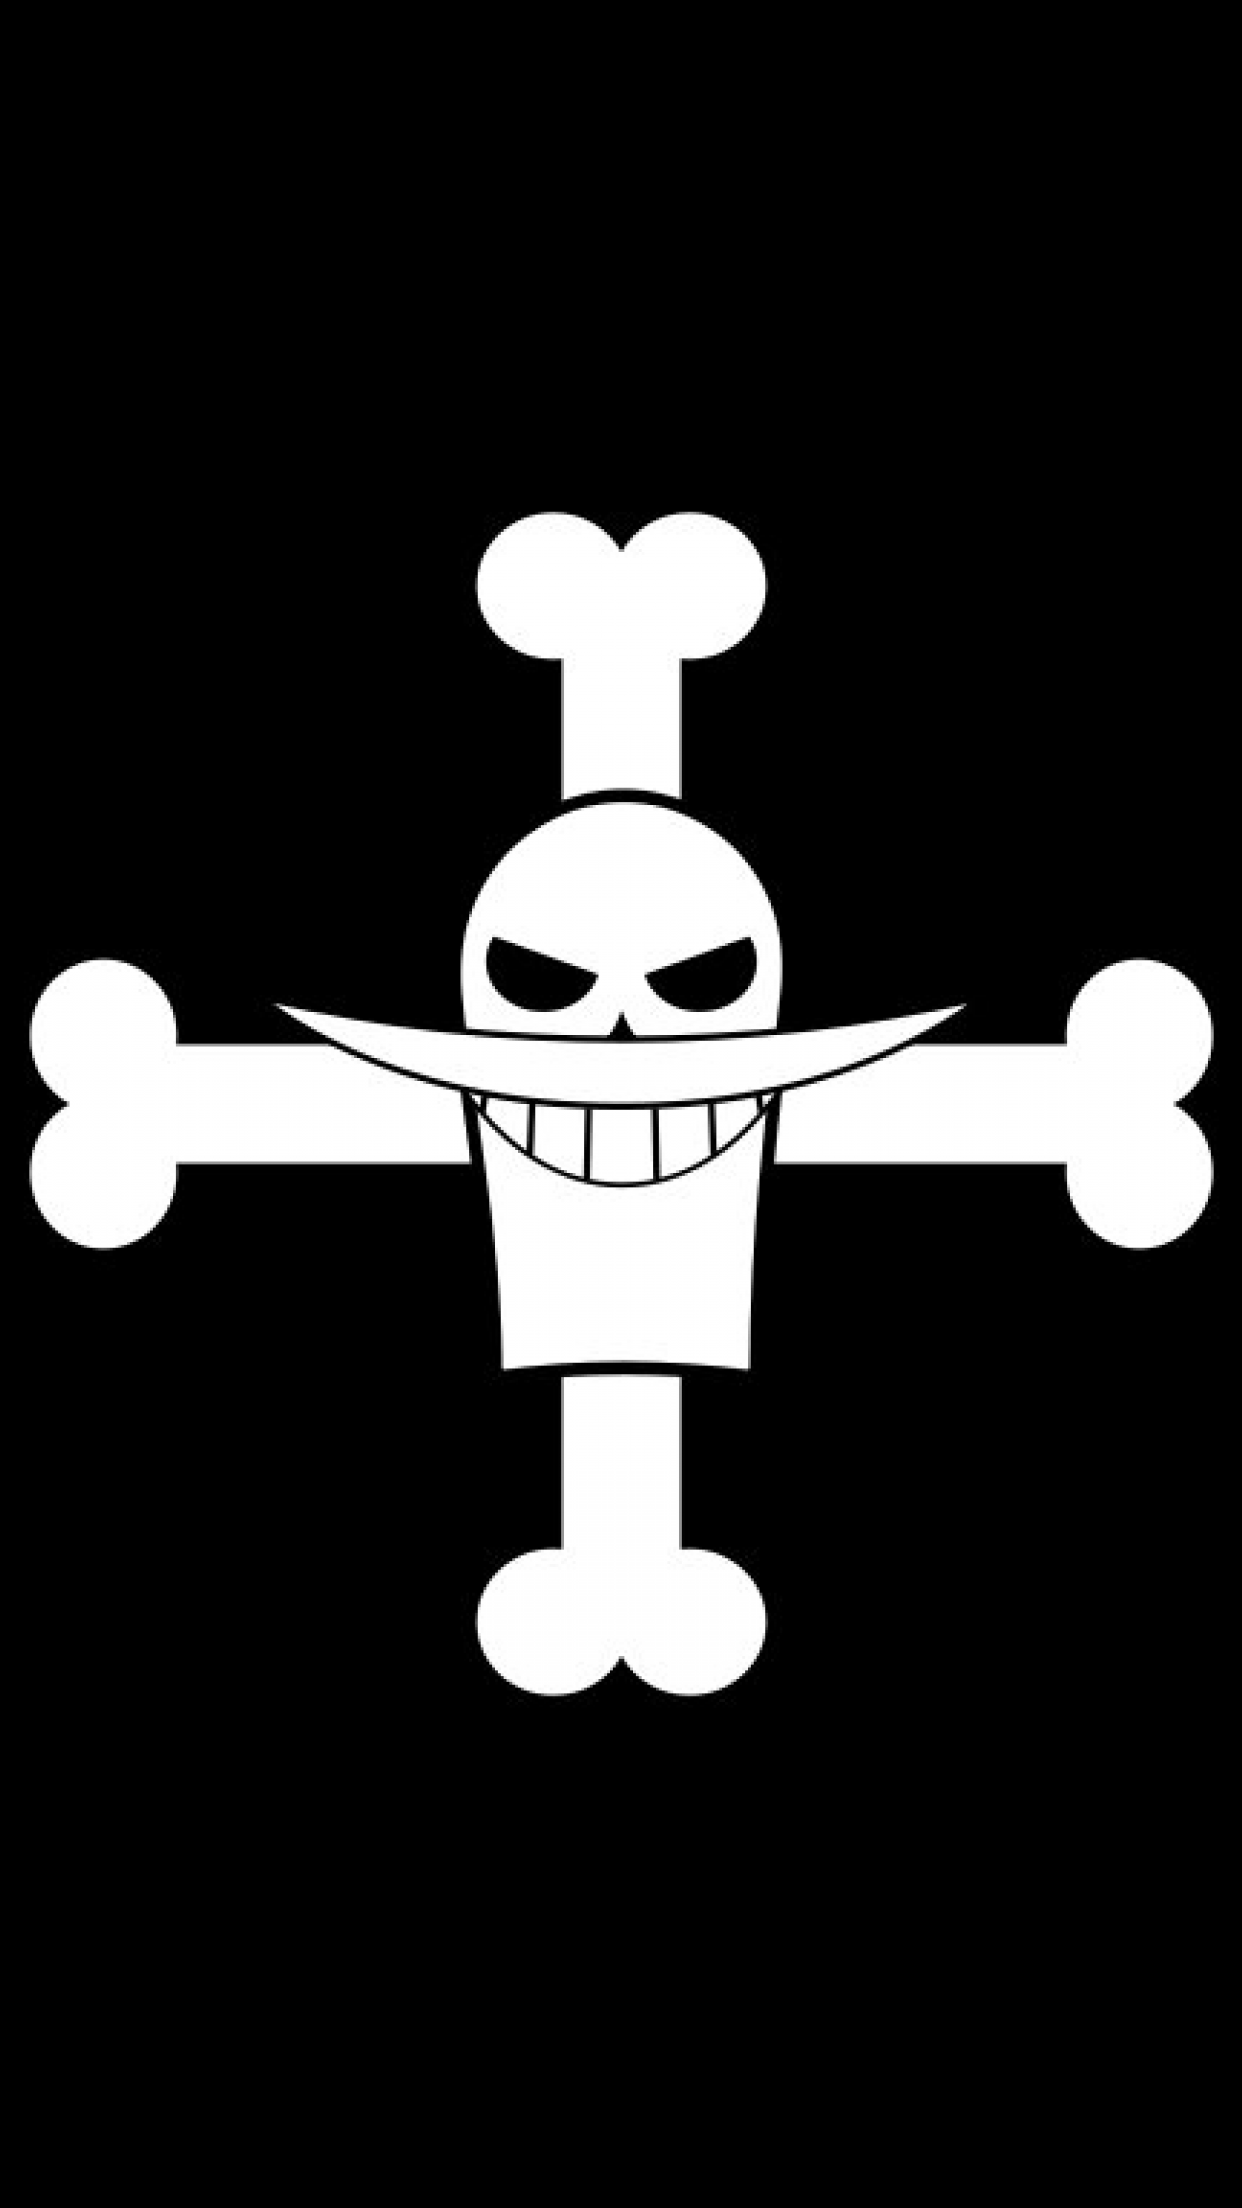 Simple Marco Black background Jolly roger One piece Flag Dark ...